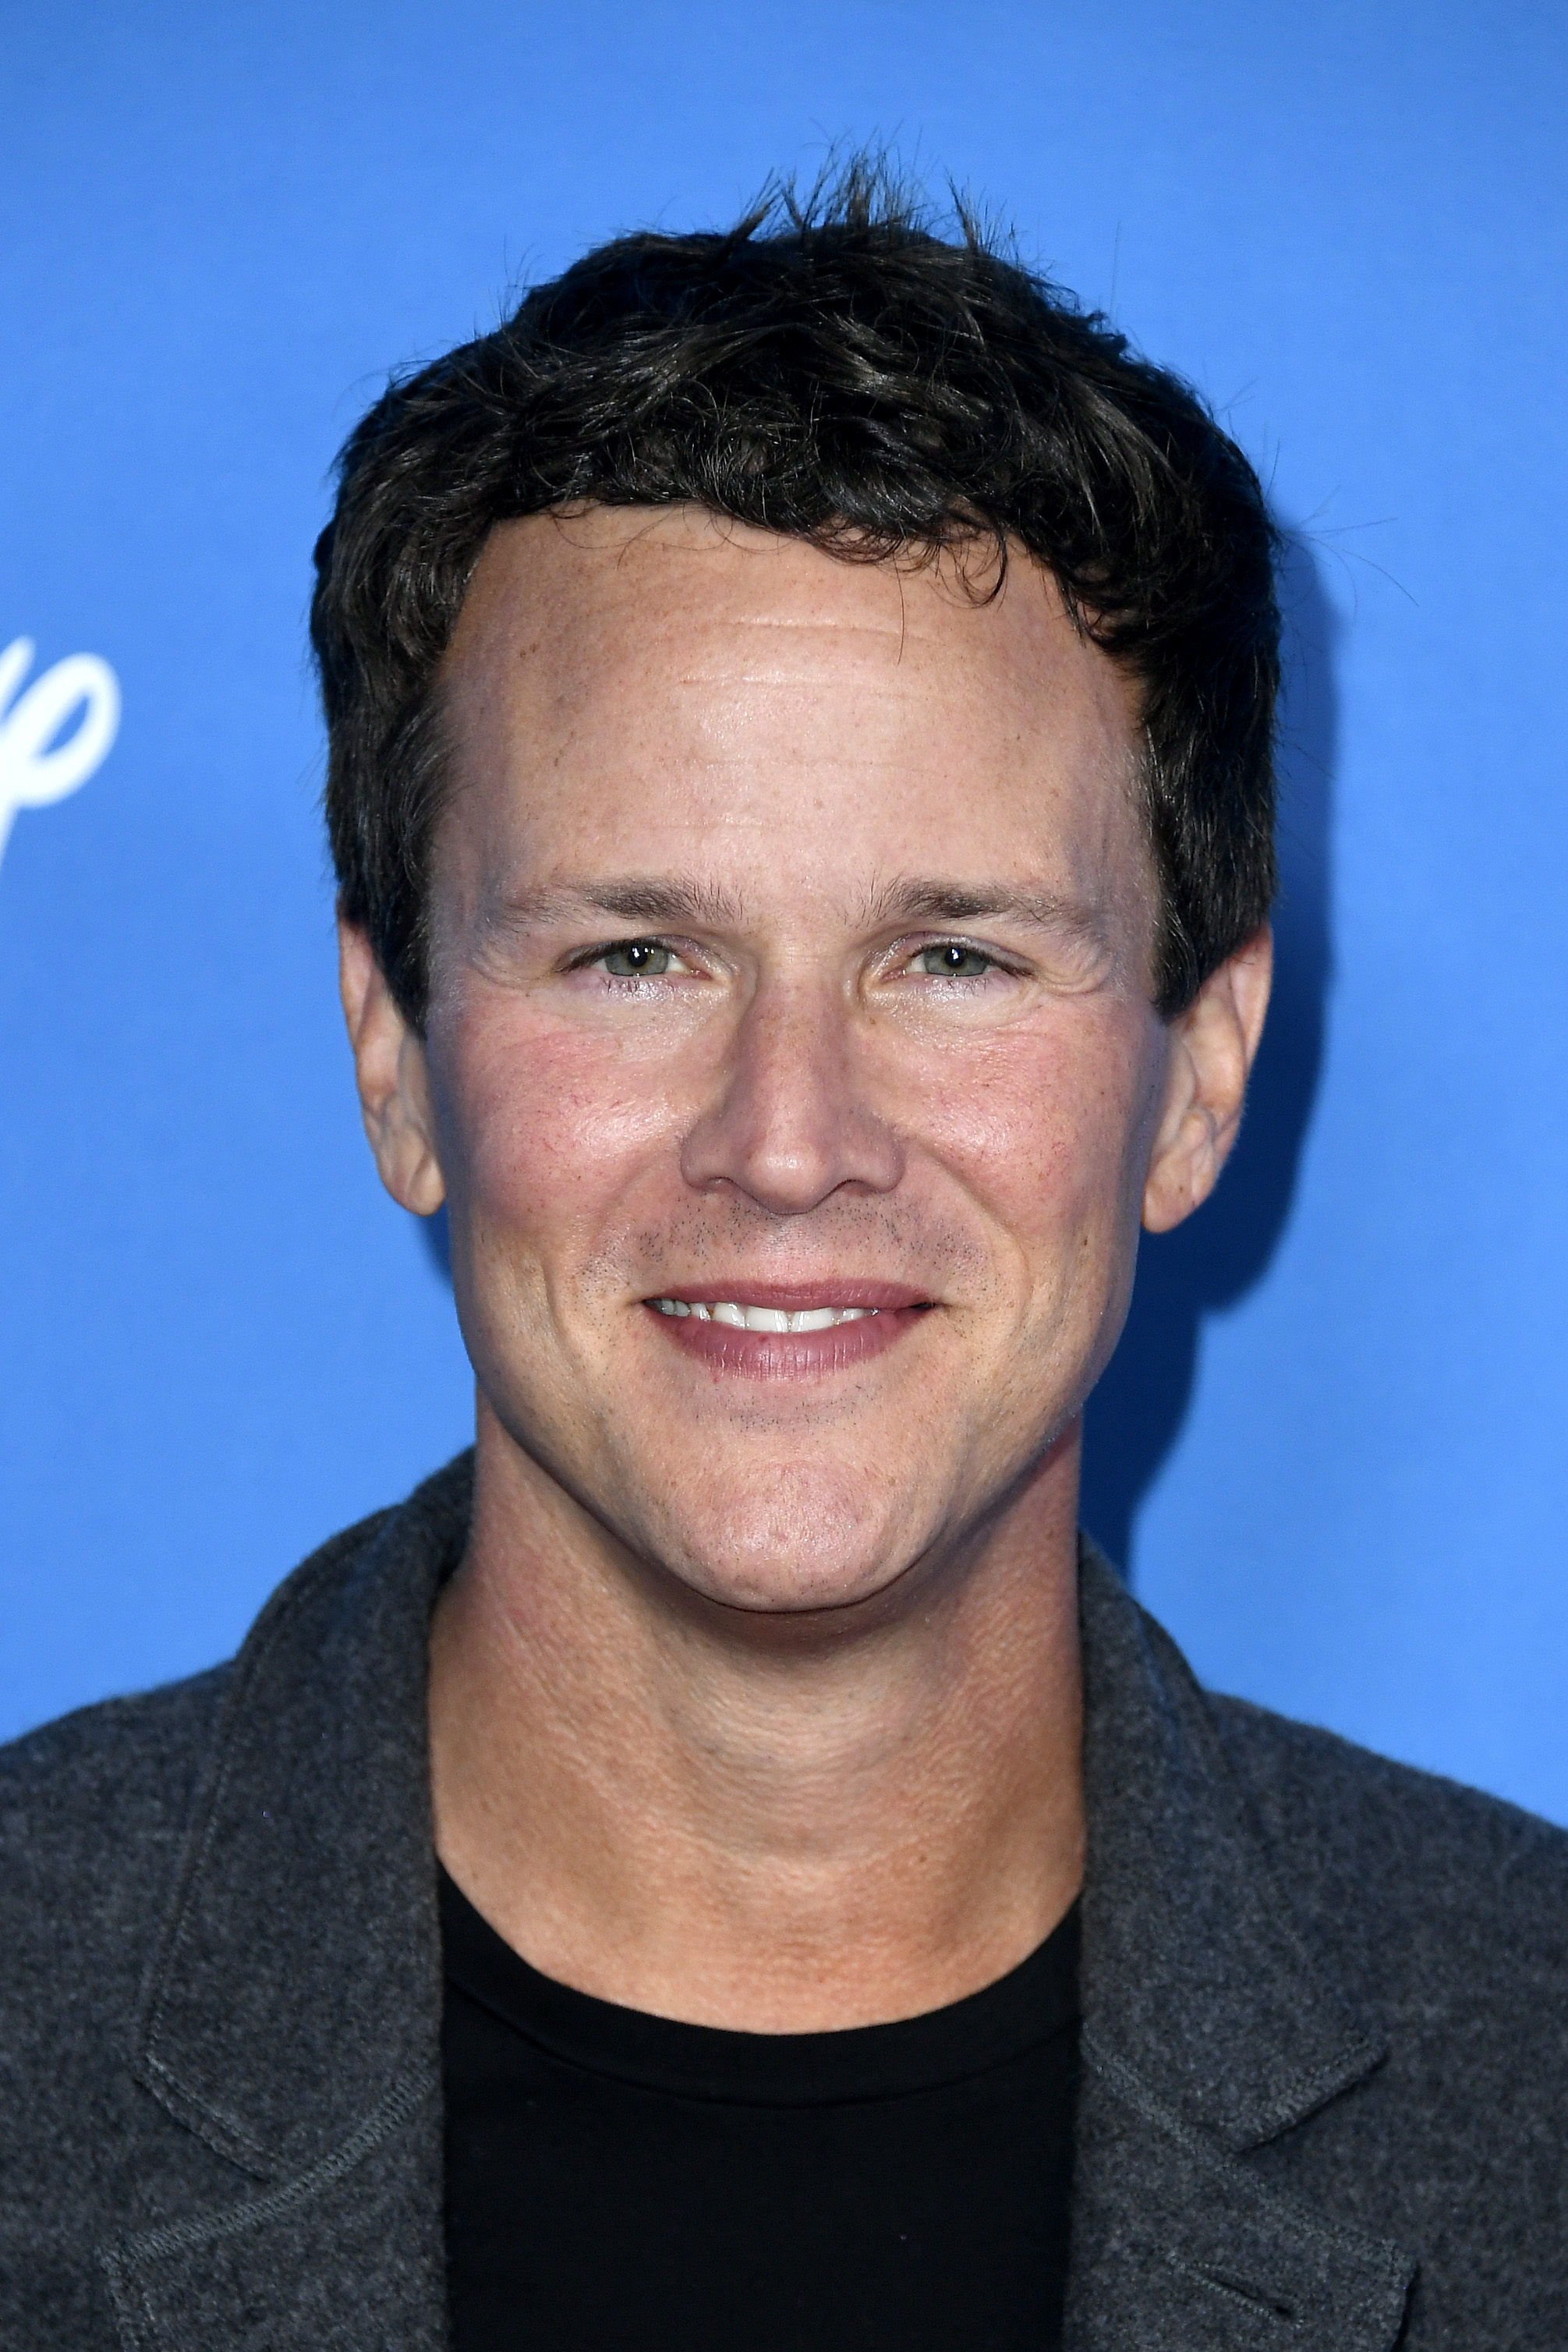 Scott Weinger attends the Go Behind The Scenes with Walt Disney Studios during D23 Expo 2019 at Anaheim Convention Center on August 24, 2019 in Anaheim, California. | Source: Getty Images